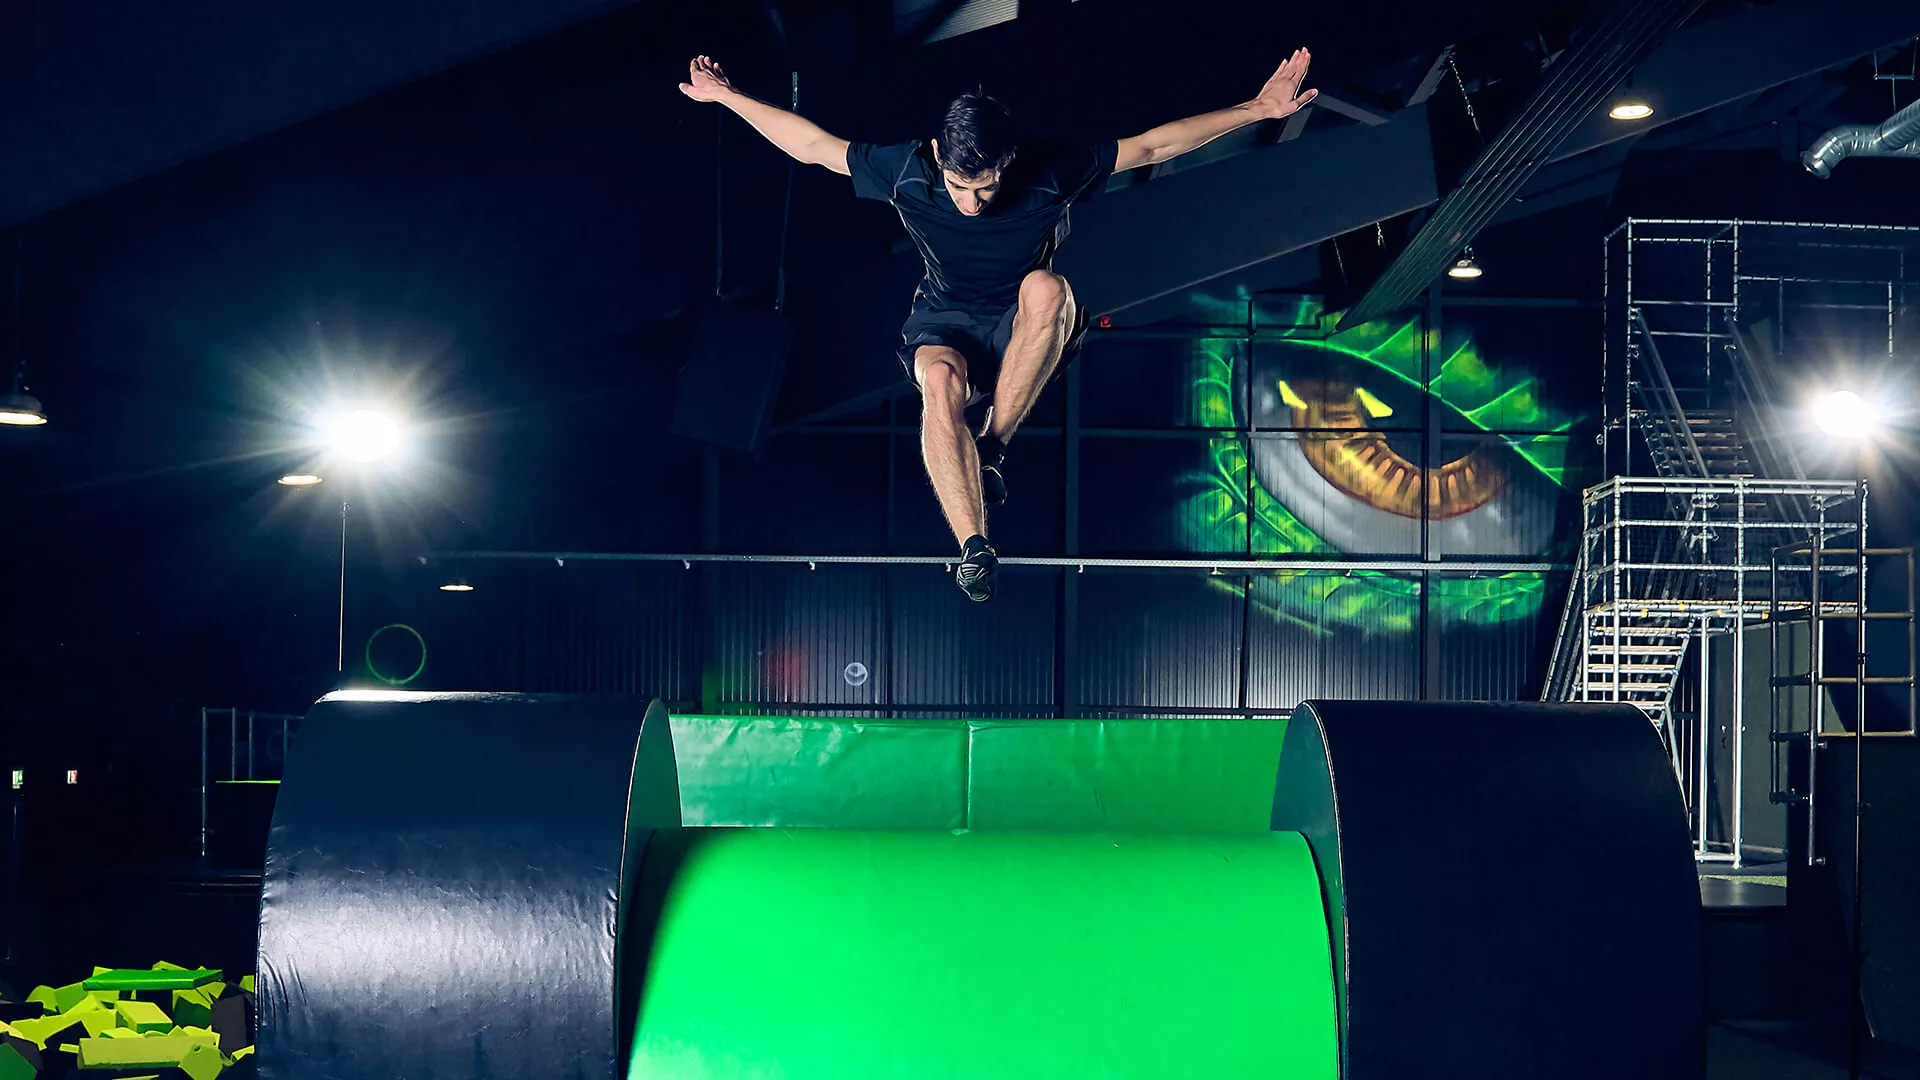  Trampoline Parks Attractions - Parkour Track